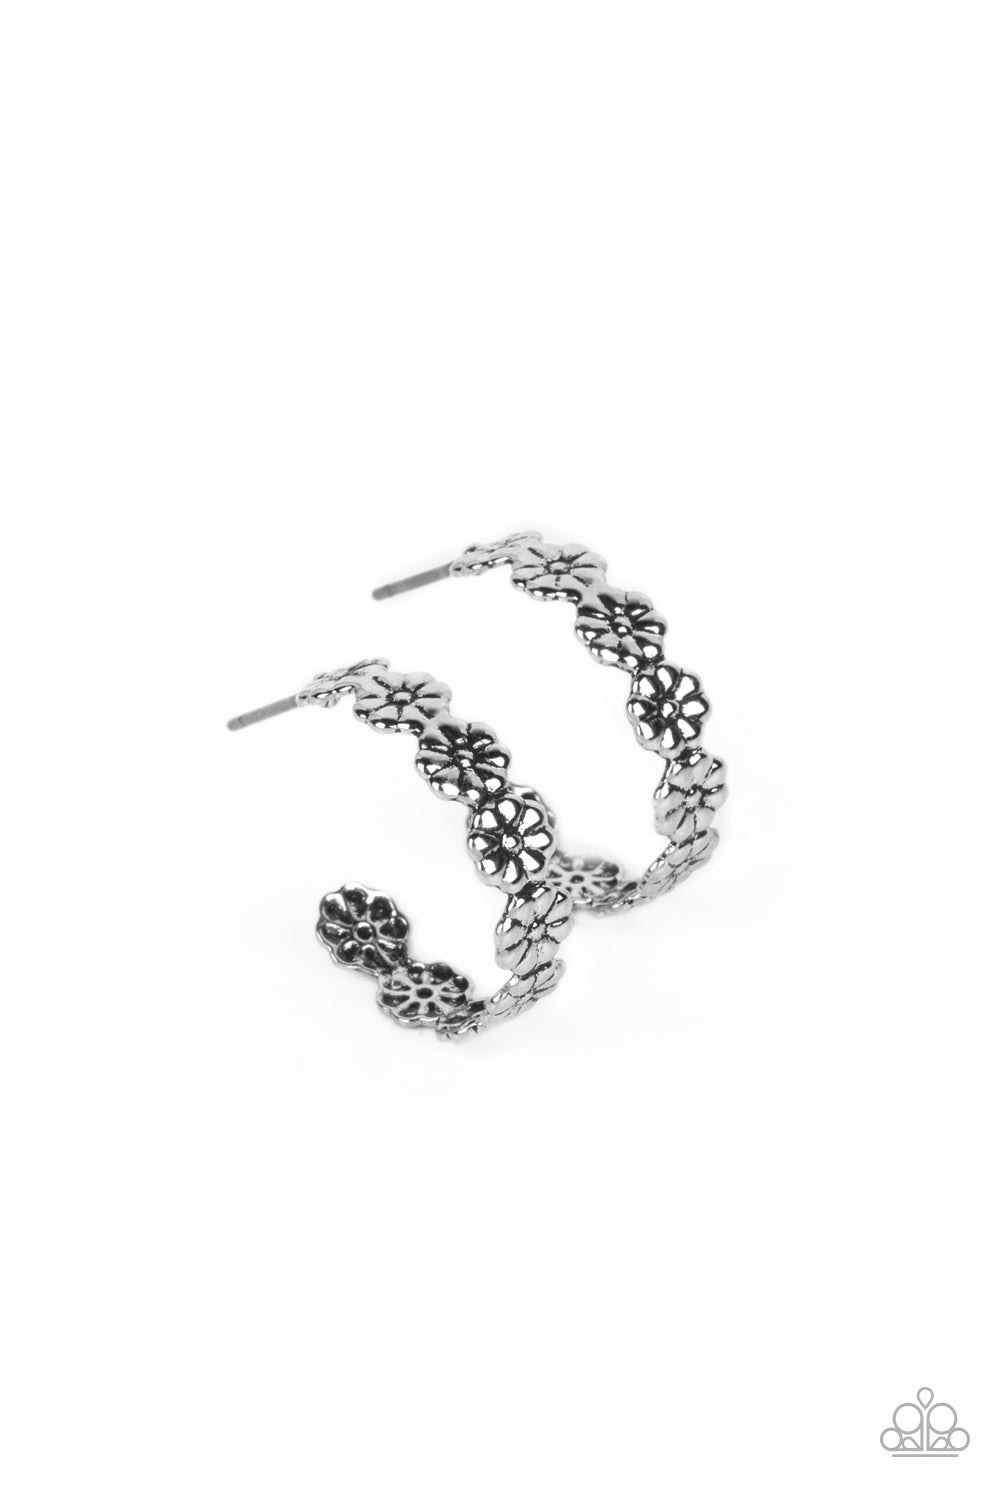 Floral Fad Silver Hoop Earring - Paparazzi Accessories  Tiny silver flowers connect to one another as they wrap around the ear to create a charming, dainty hoop. Earring attaches to a standard post fitting. Hoop measures approximately 3/4" in diameter.  Sold as one pair of hoop earrings.